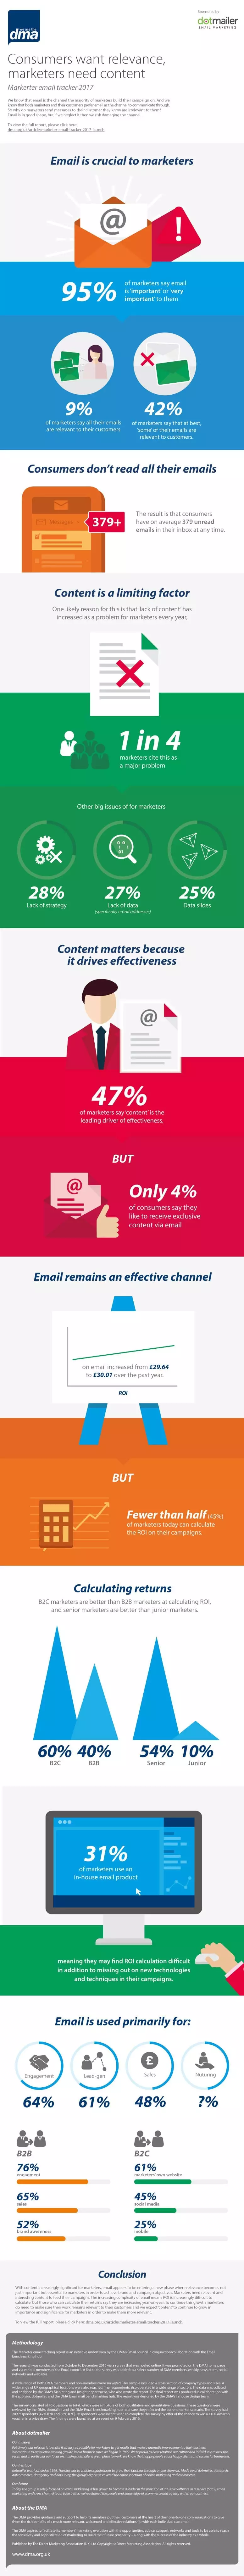 Infographic: DMA’s latest Marketer email tracker 2017 report